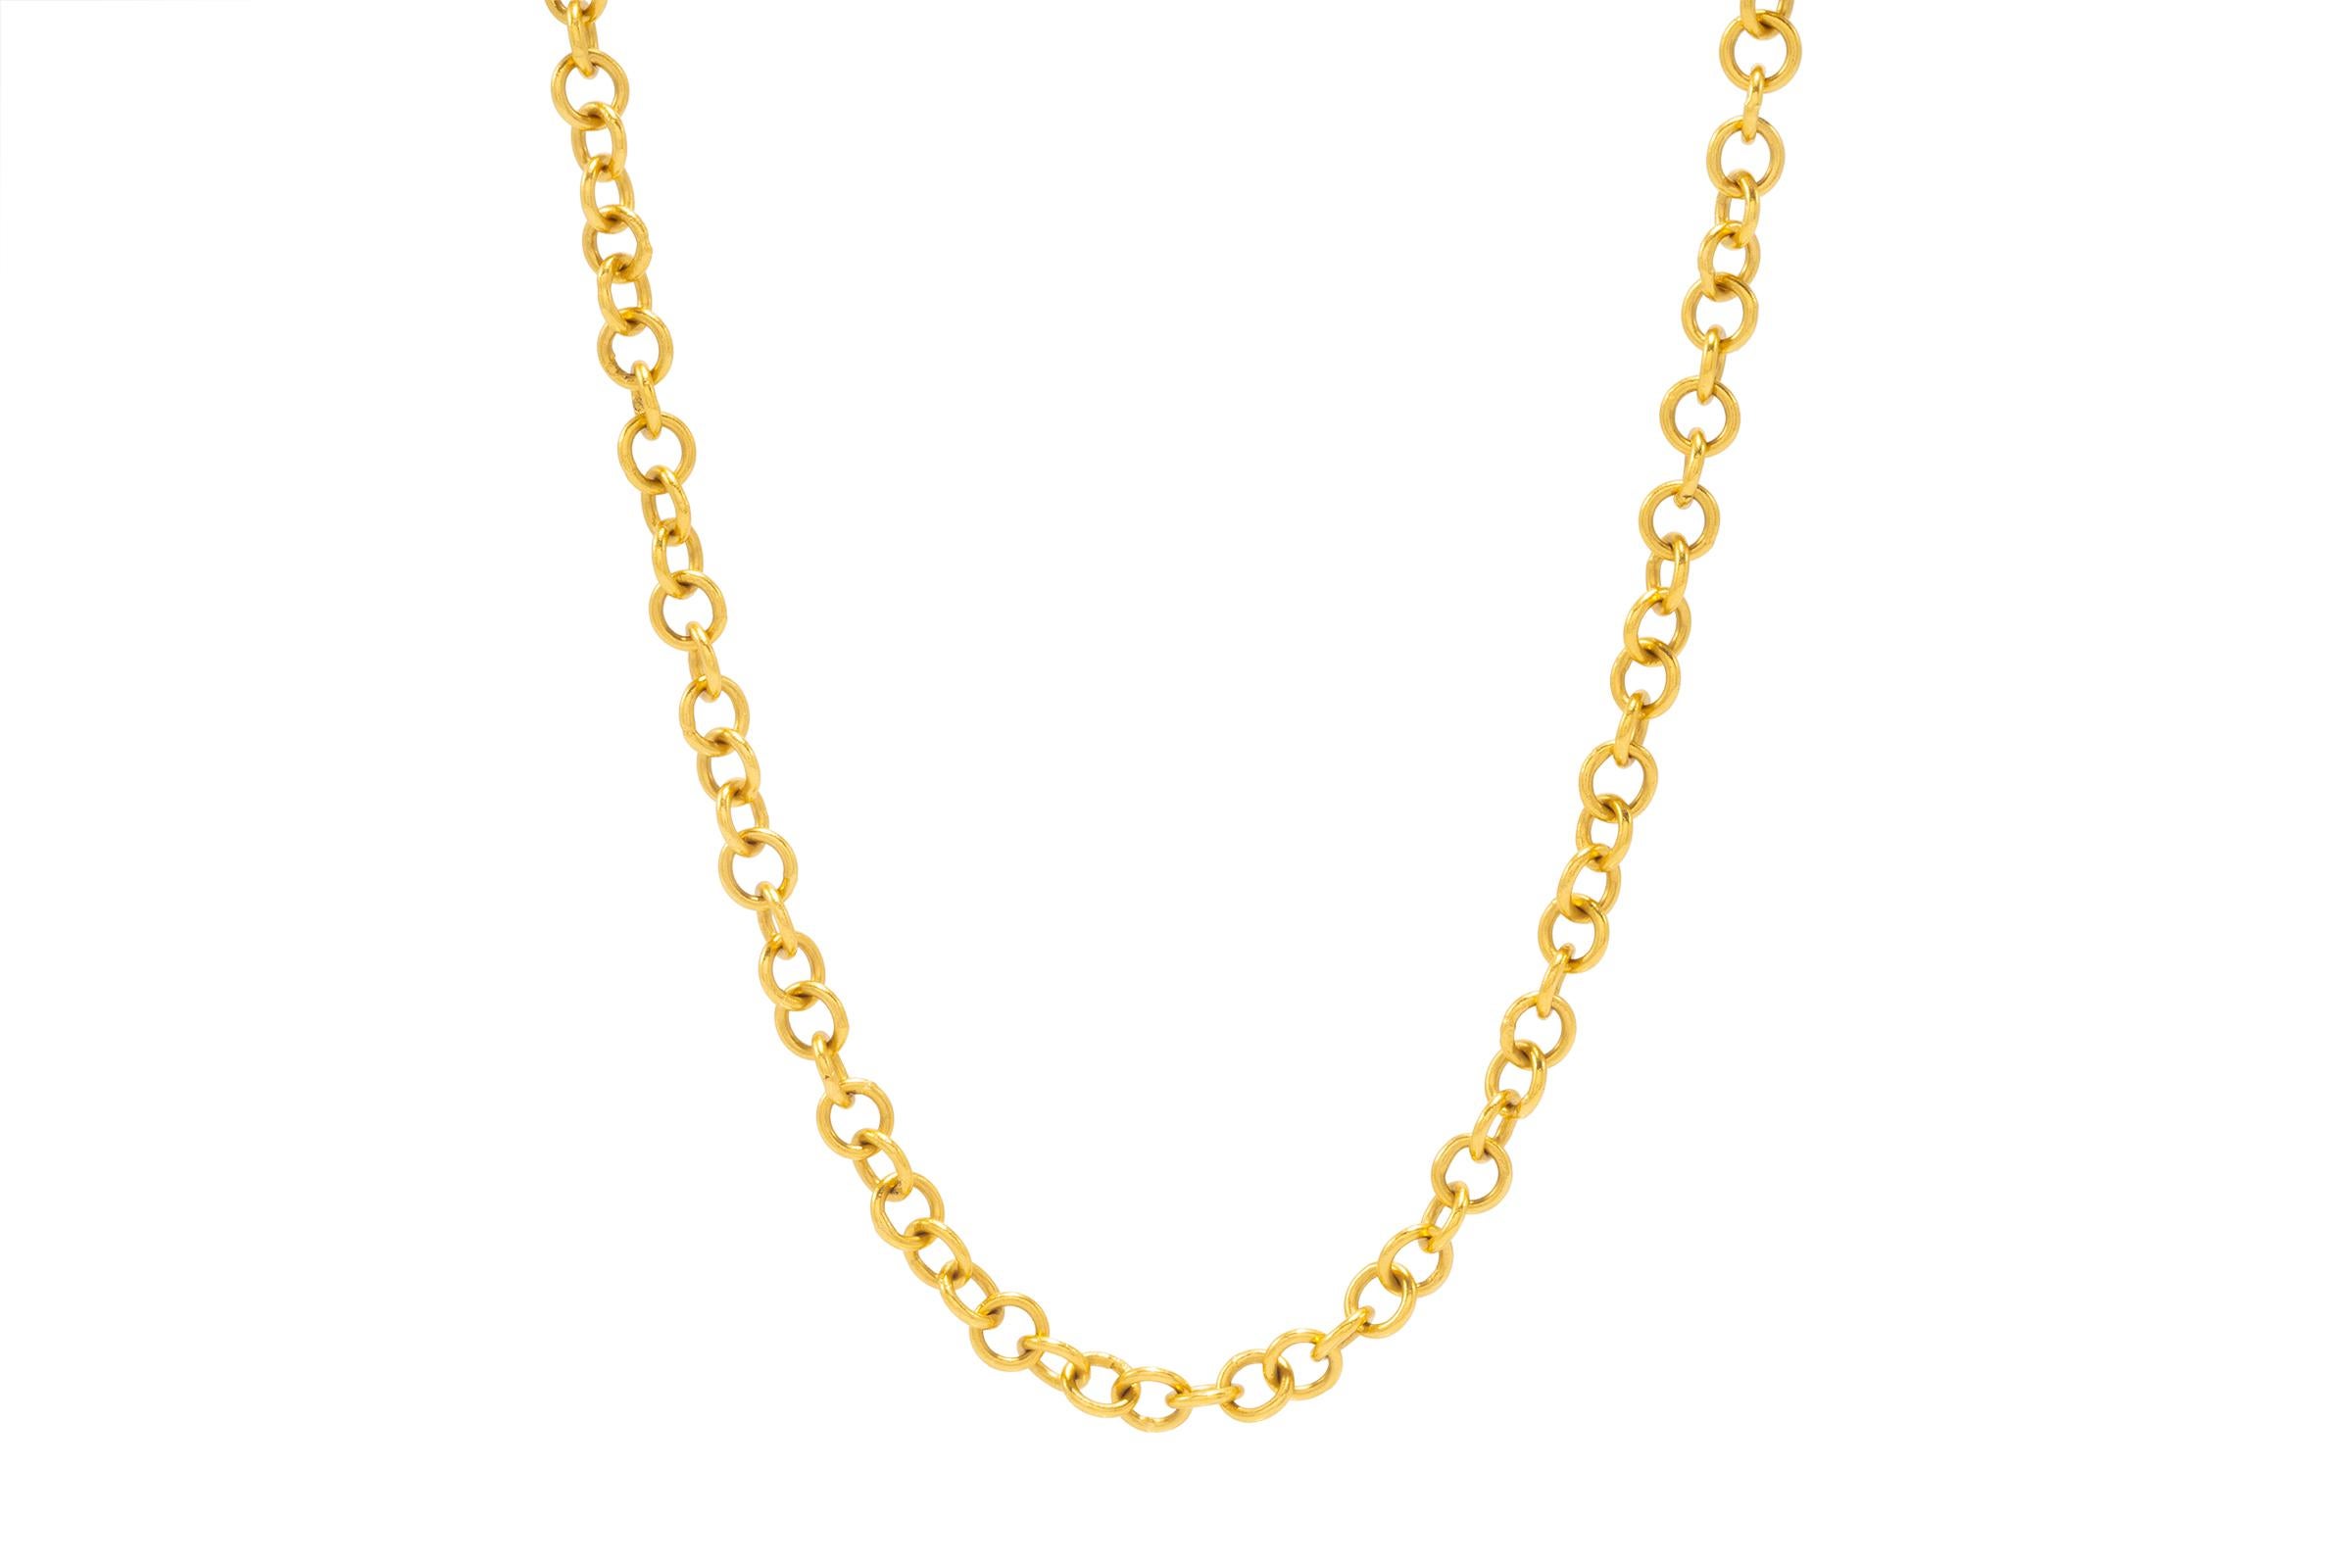 hand made gold chain design